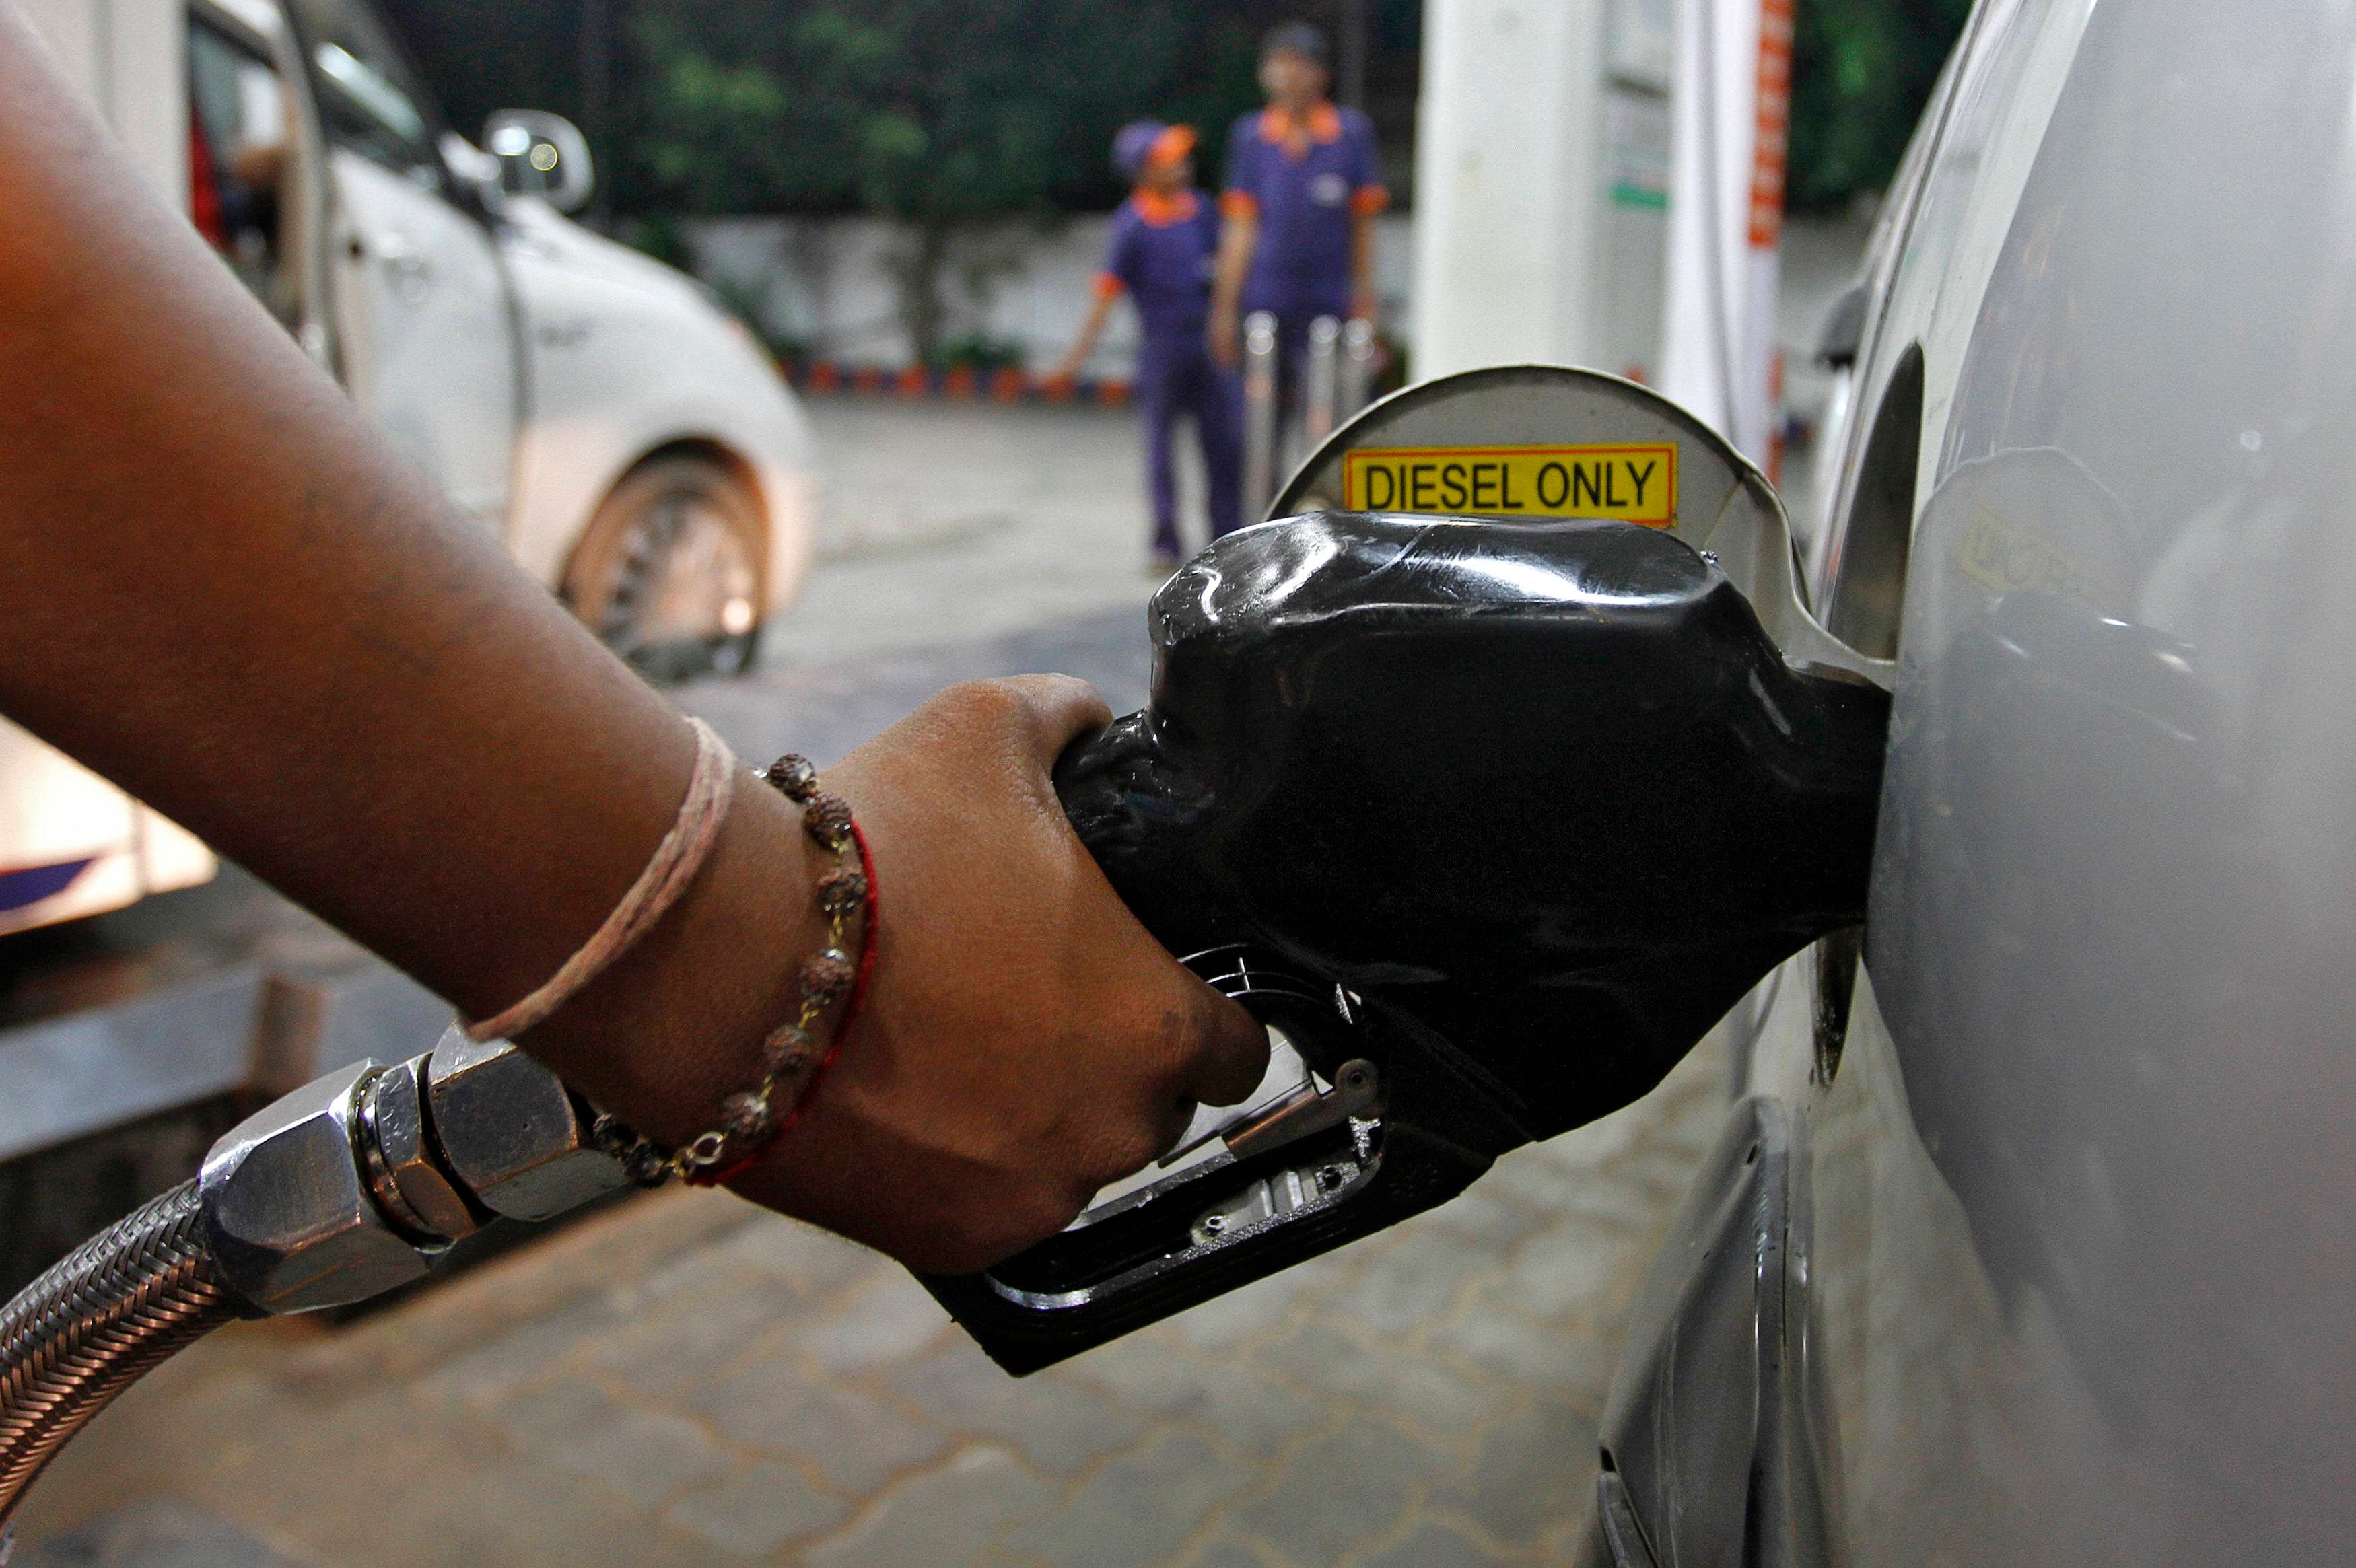 Petrol in Delhi will cost Rs 63.02 per litre from midnight tonight, while a litre of diesel will cost Rs 51.67, said Indian Oil Corporation (IOC), the nation's largest fuel retailer. Reuters Photo